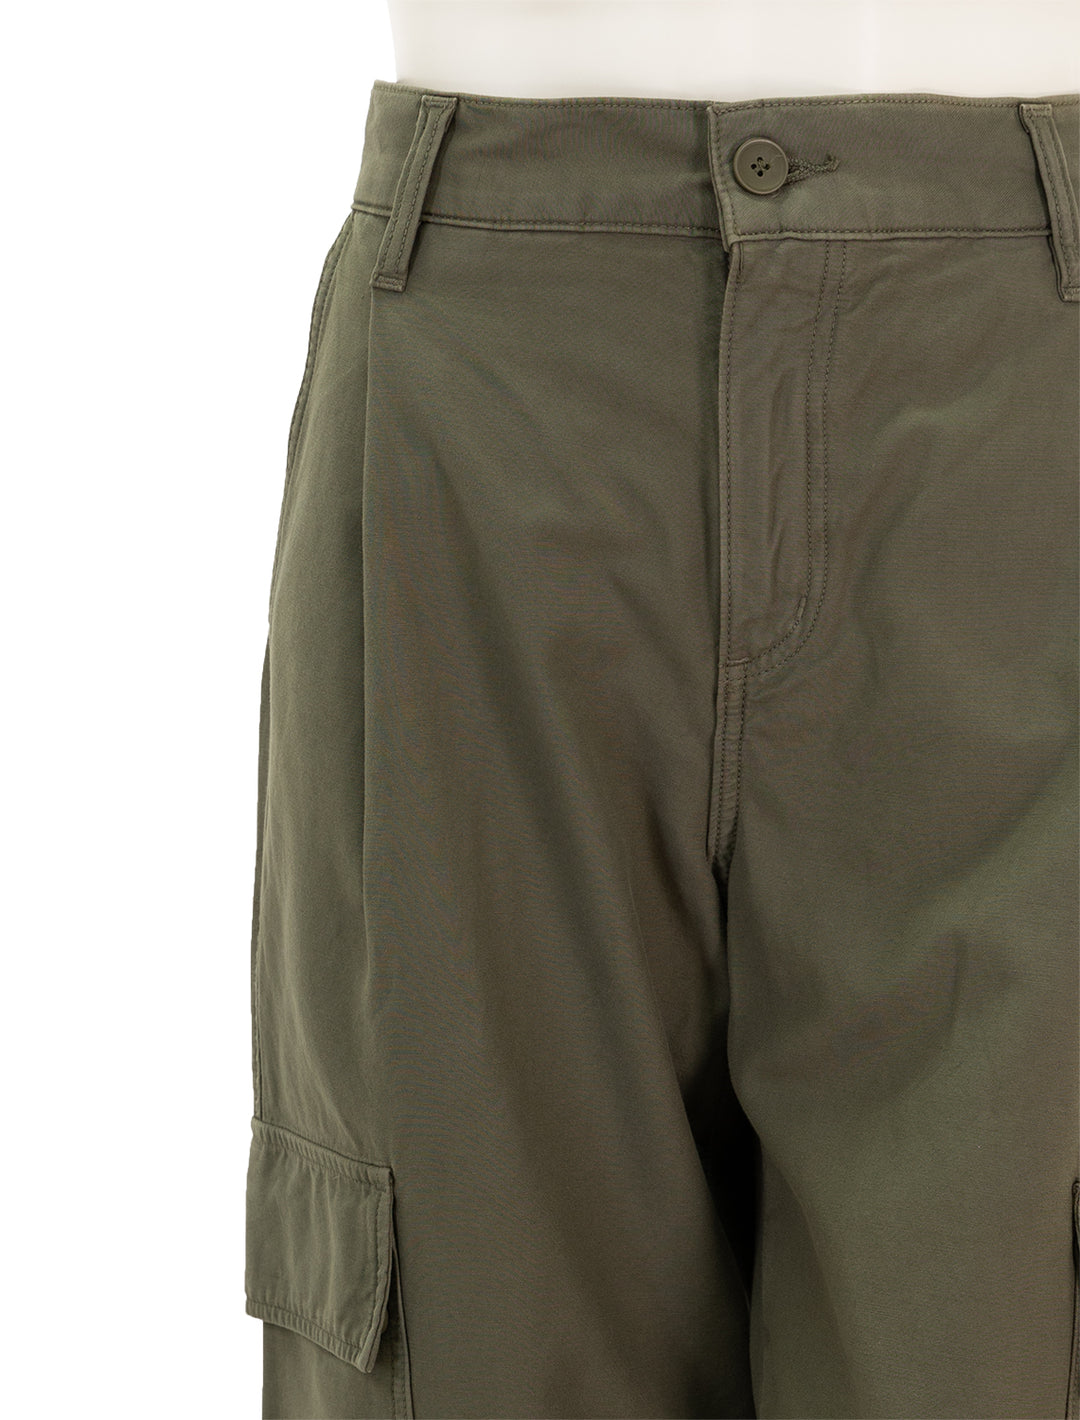 Close-up view of AGOLDE's jericho pant in fatigue.